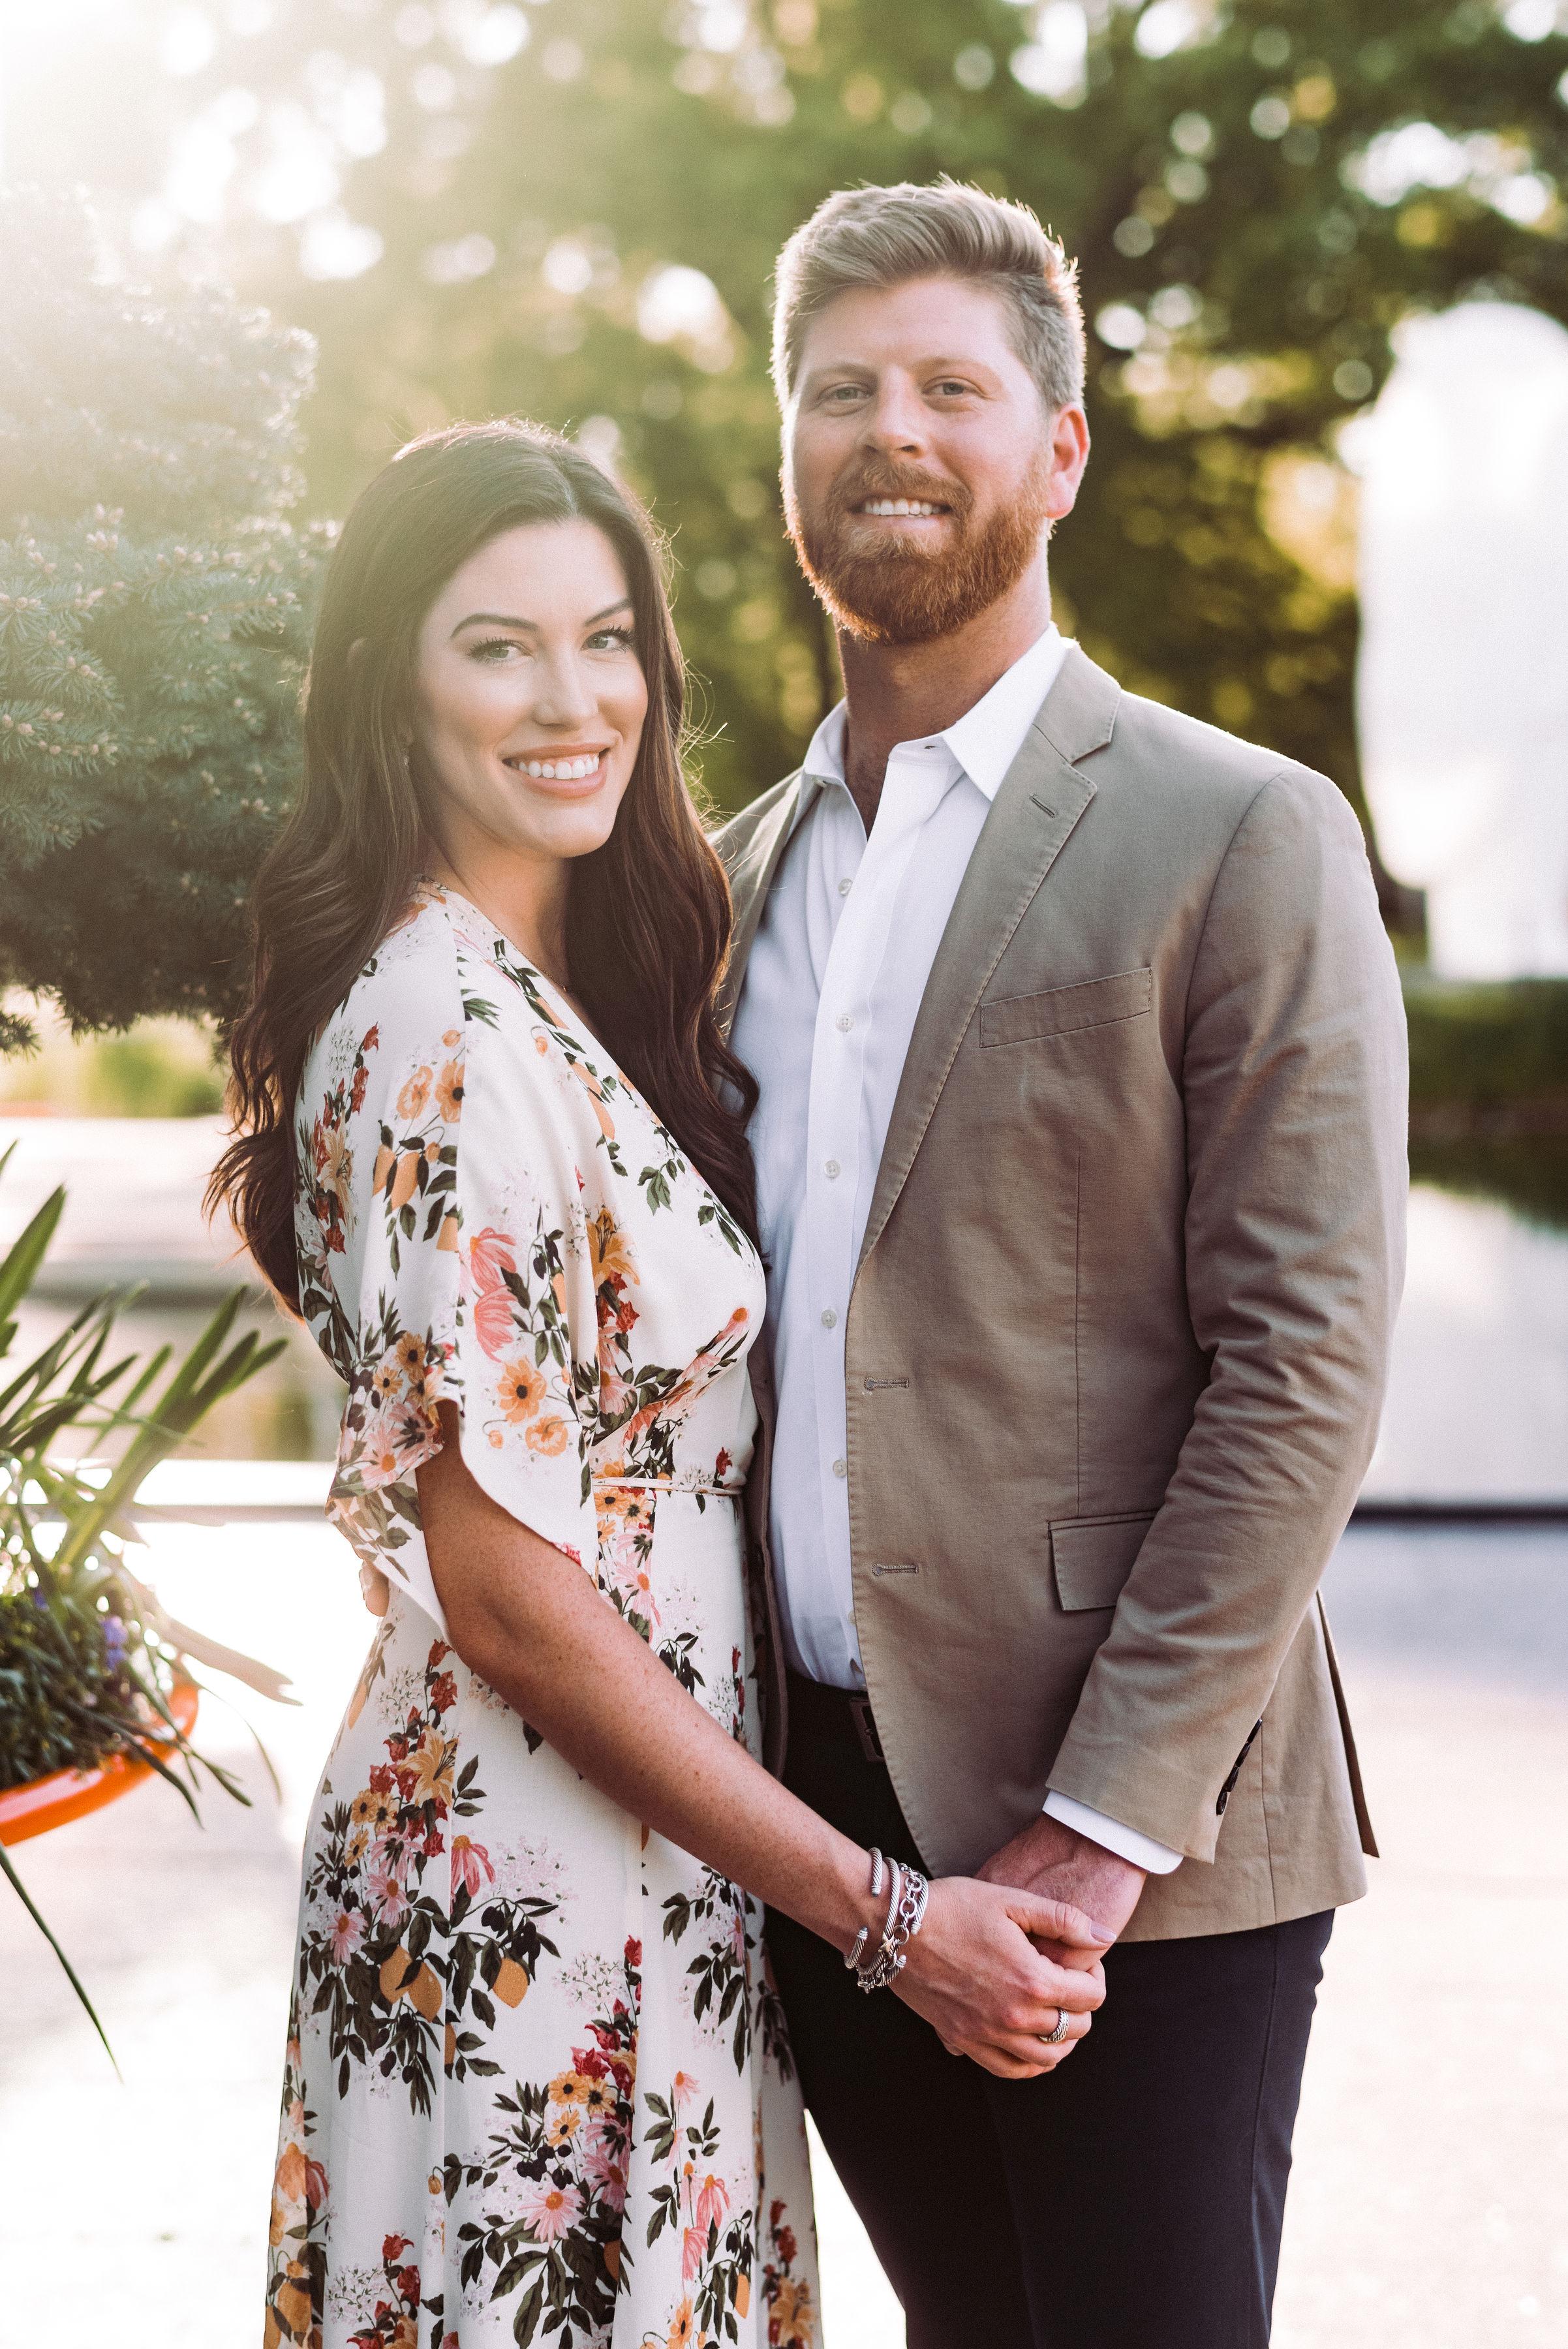 The Wedding Website of Meredith Hall and Christopher Miller